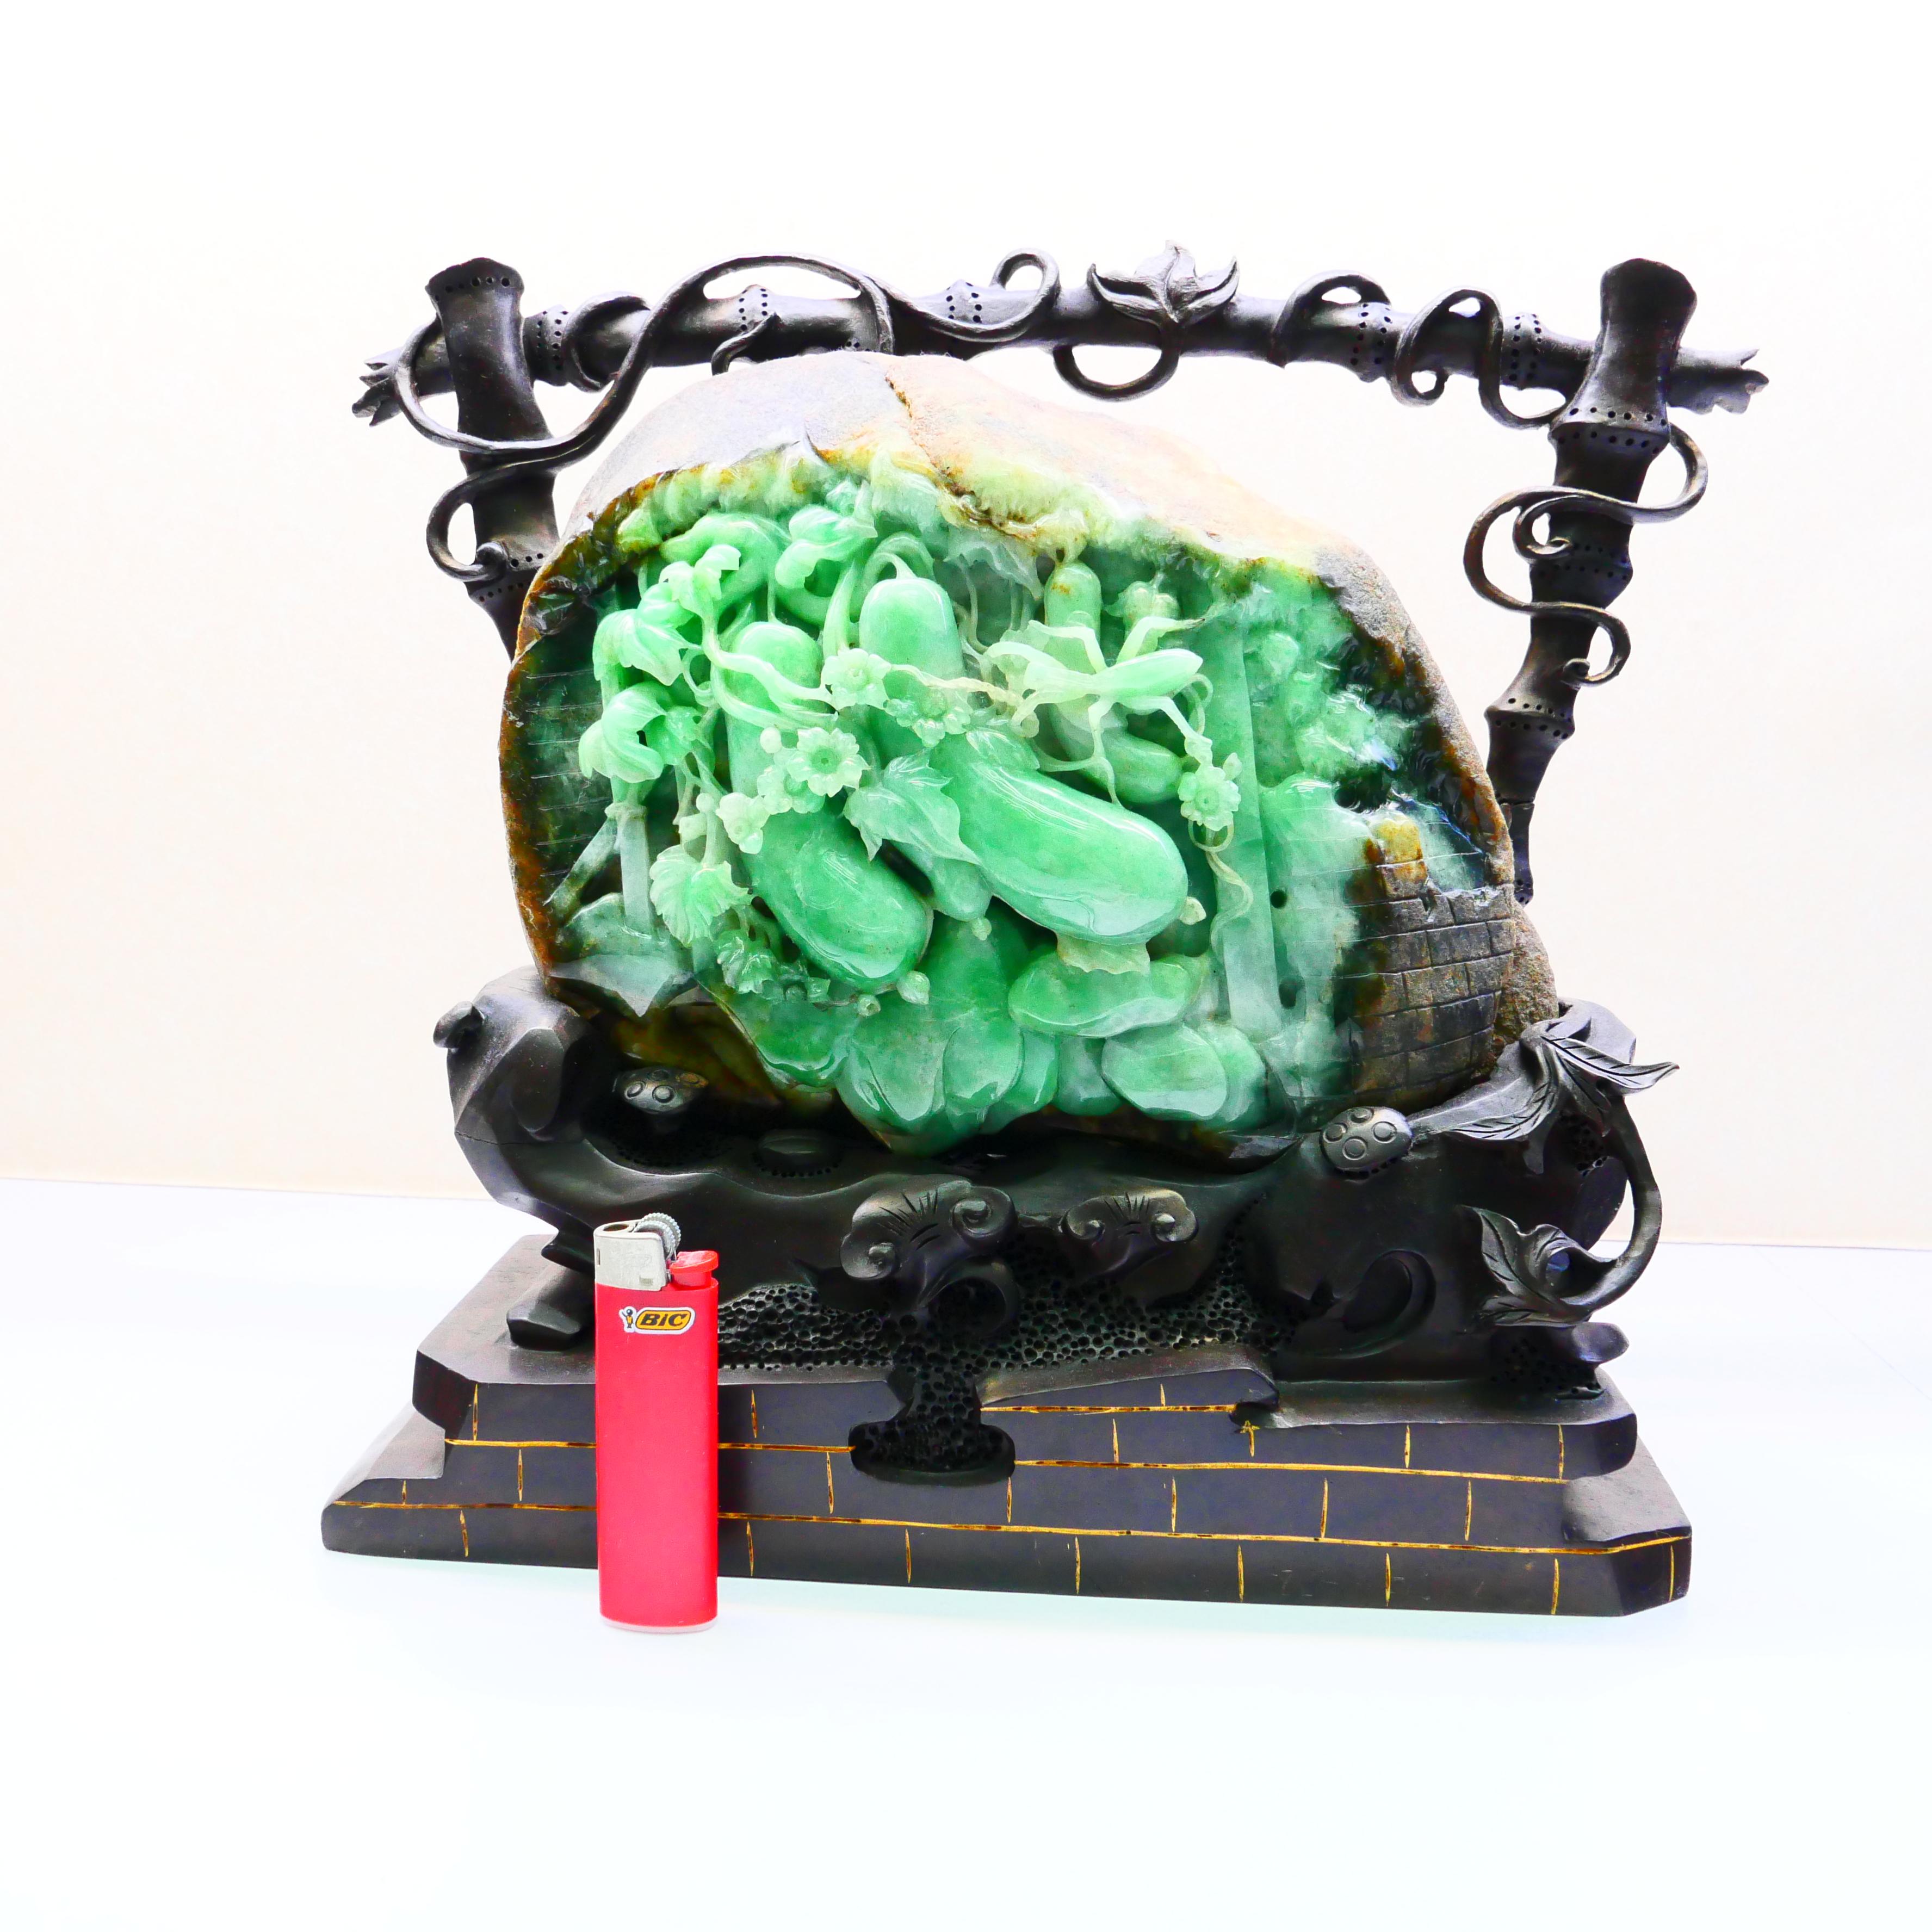 From our extensive Jade collection, here is another one to add to someones important collection. This piece was carved in the period of 